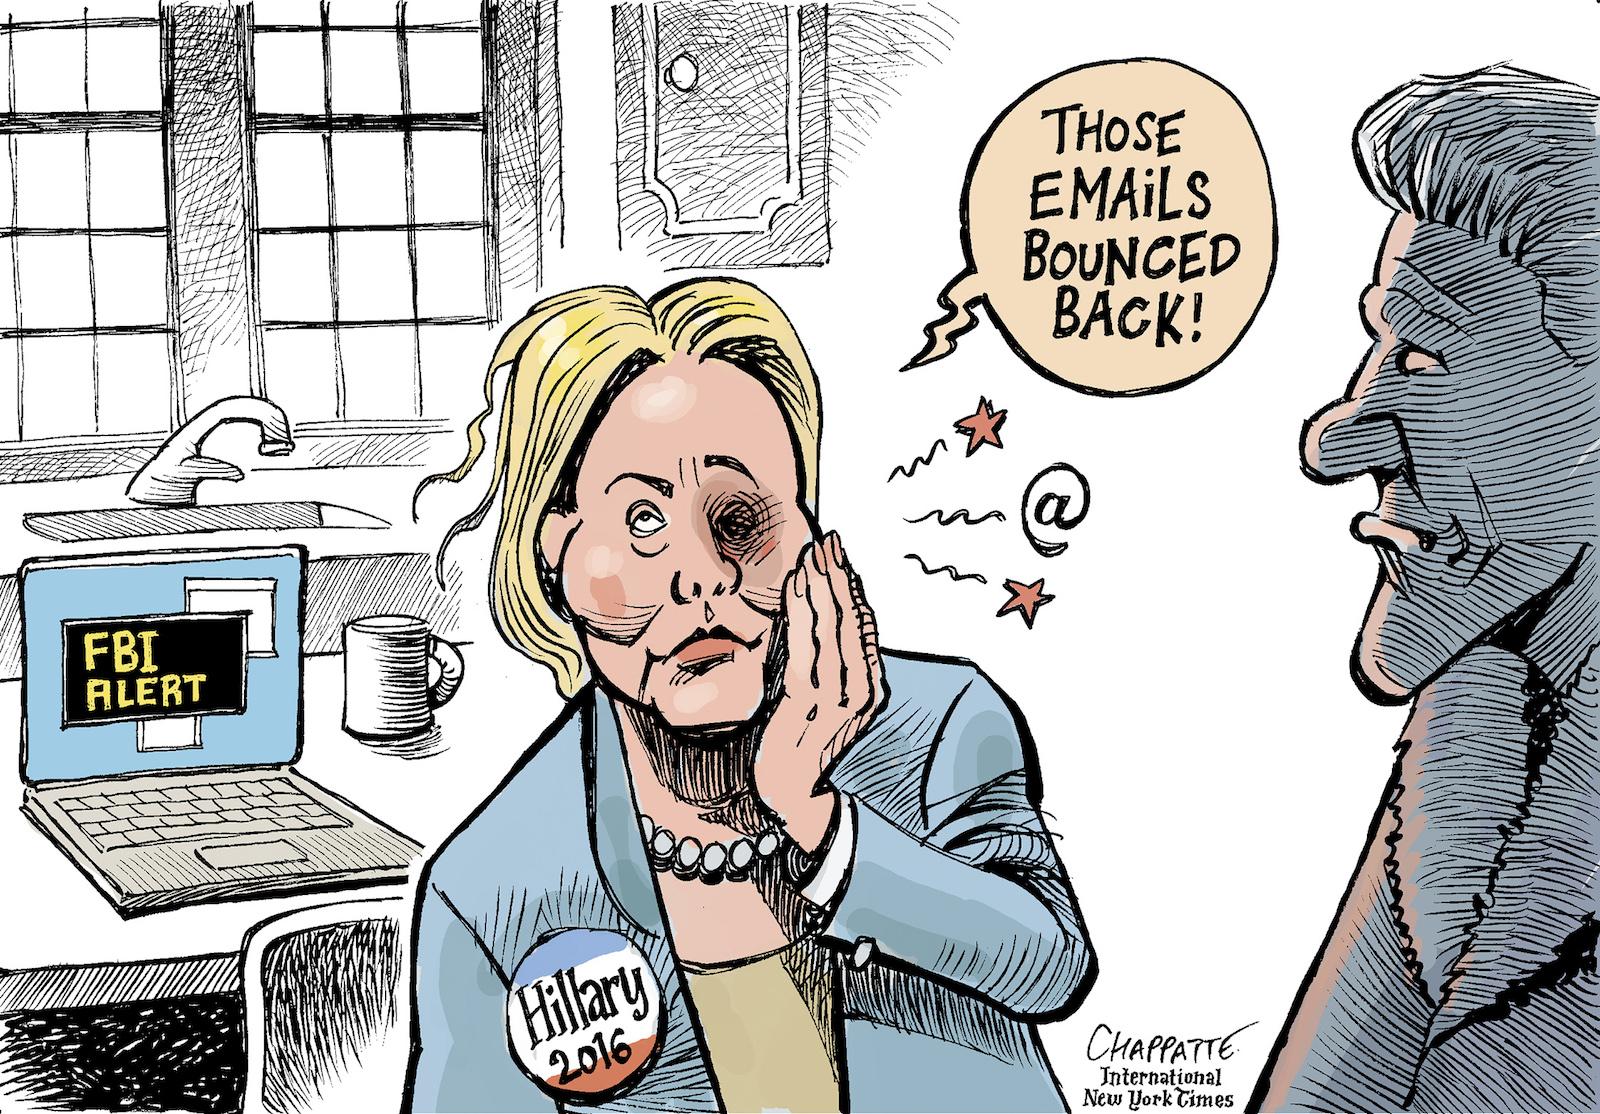 Hillary Clinton's email troubles